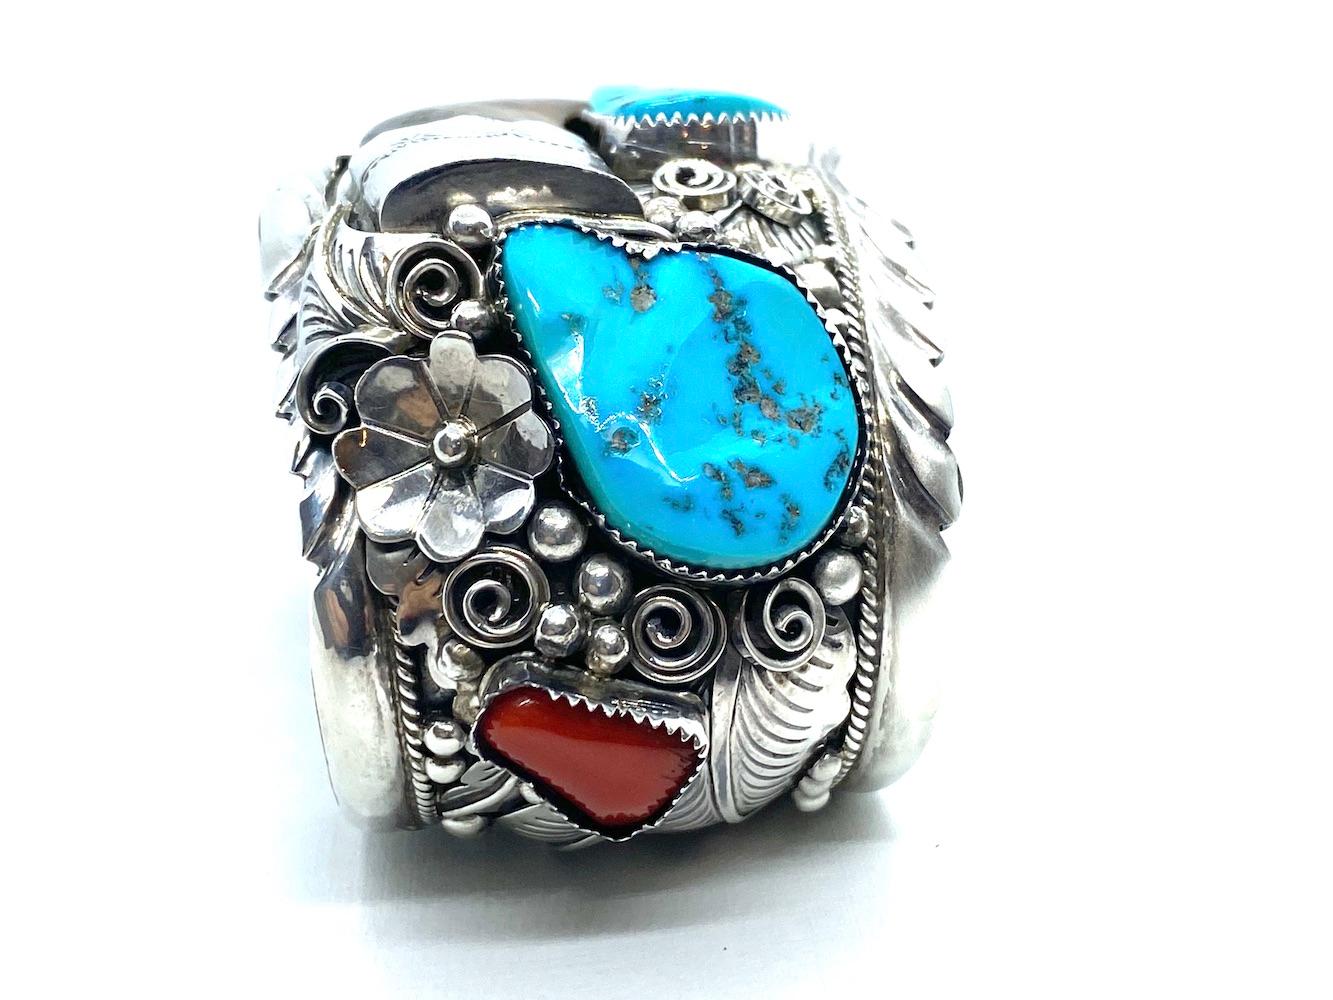 Made made and intricately designed cuff bracelet features a large bear claw. The surrounding gemstones are turquoise and coral set in textured bezels. 
Color of stones are rich and deep toned.
Bear claw is 2 inches long by 1-3/4 inch wide 

Size: